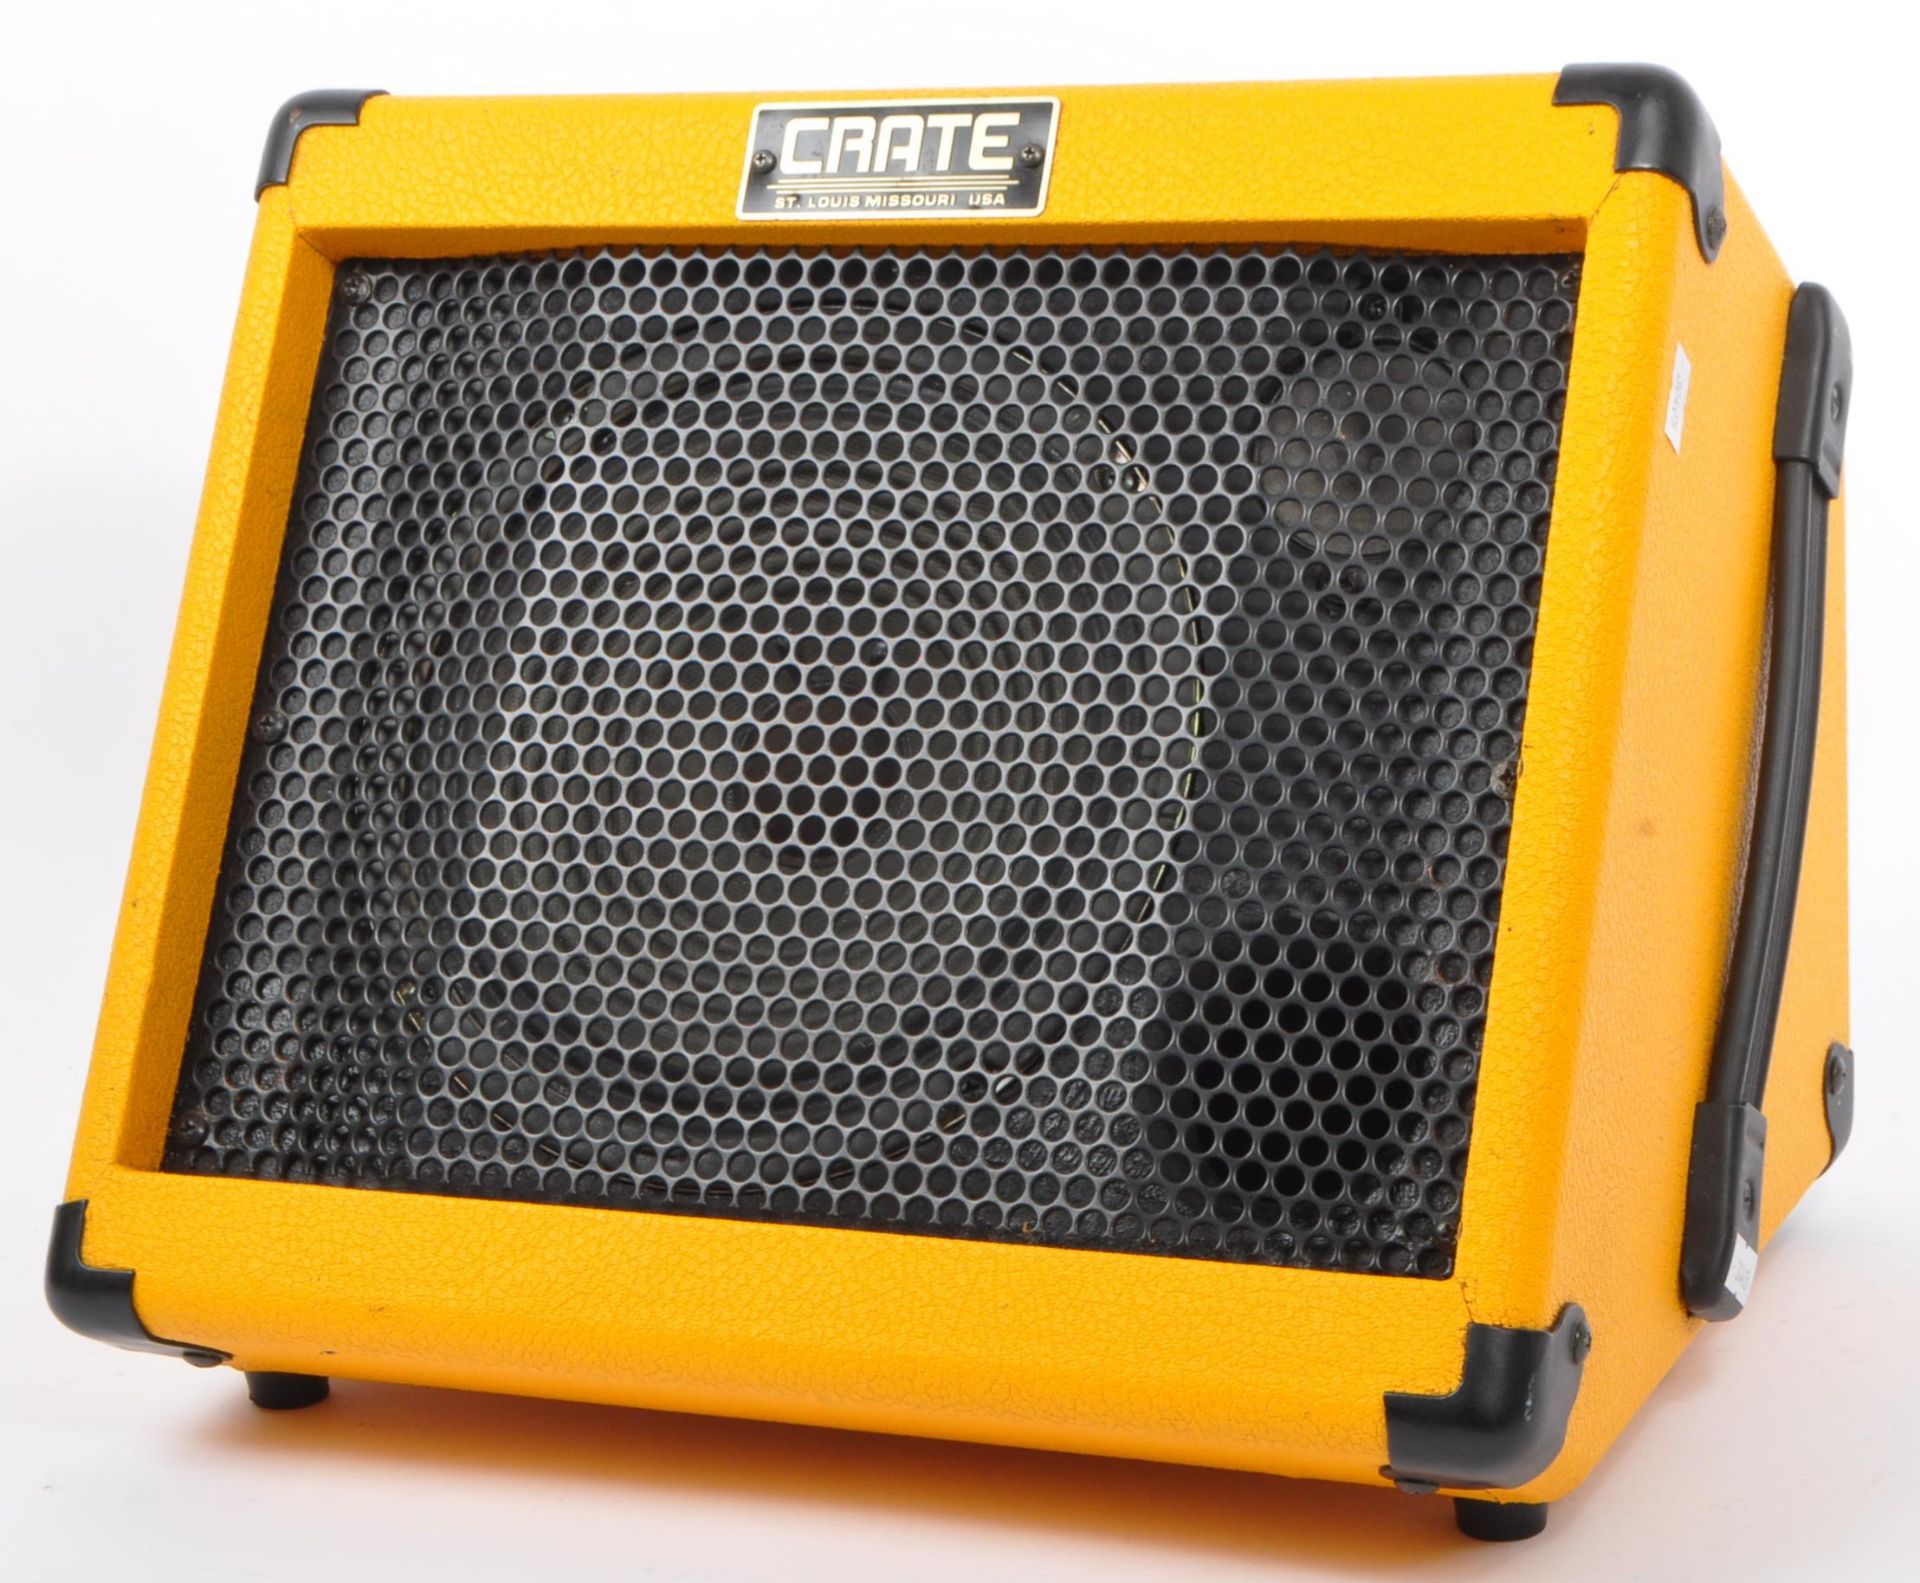 CONTEMPORARY AUDIO GUITAR TAXI TX30W AMPLIFIER BY CRATE